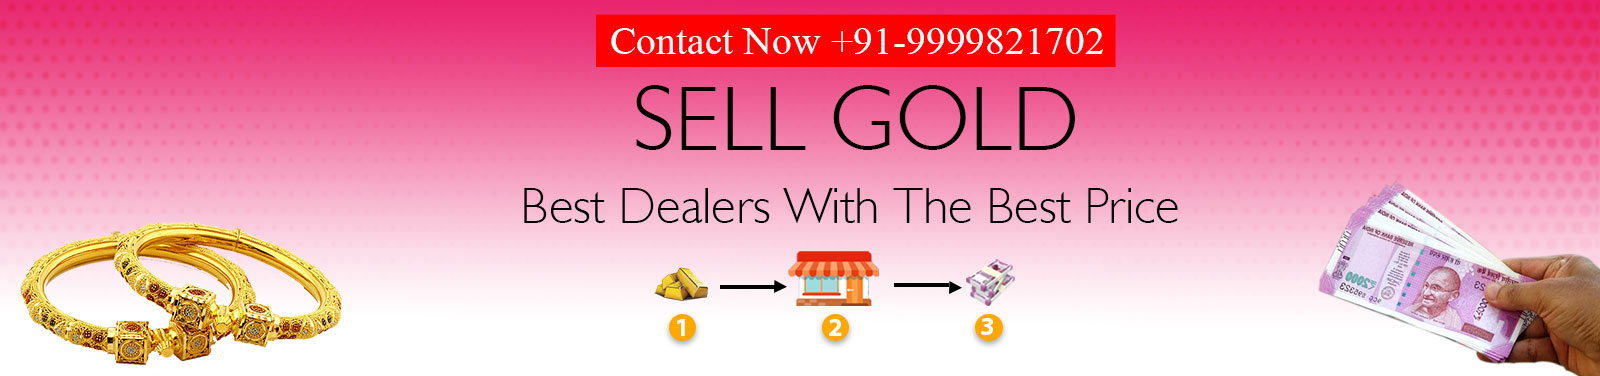 Best-place-To-Sell-Gold-Jewellery-for-Cash